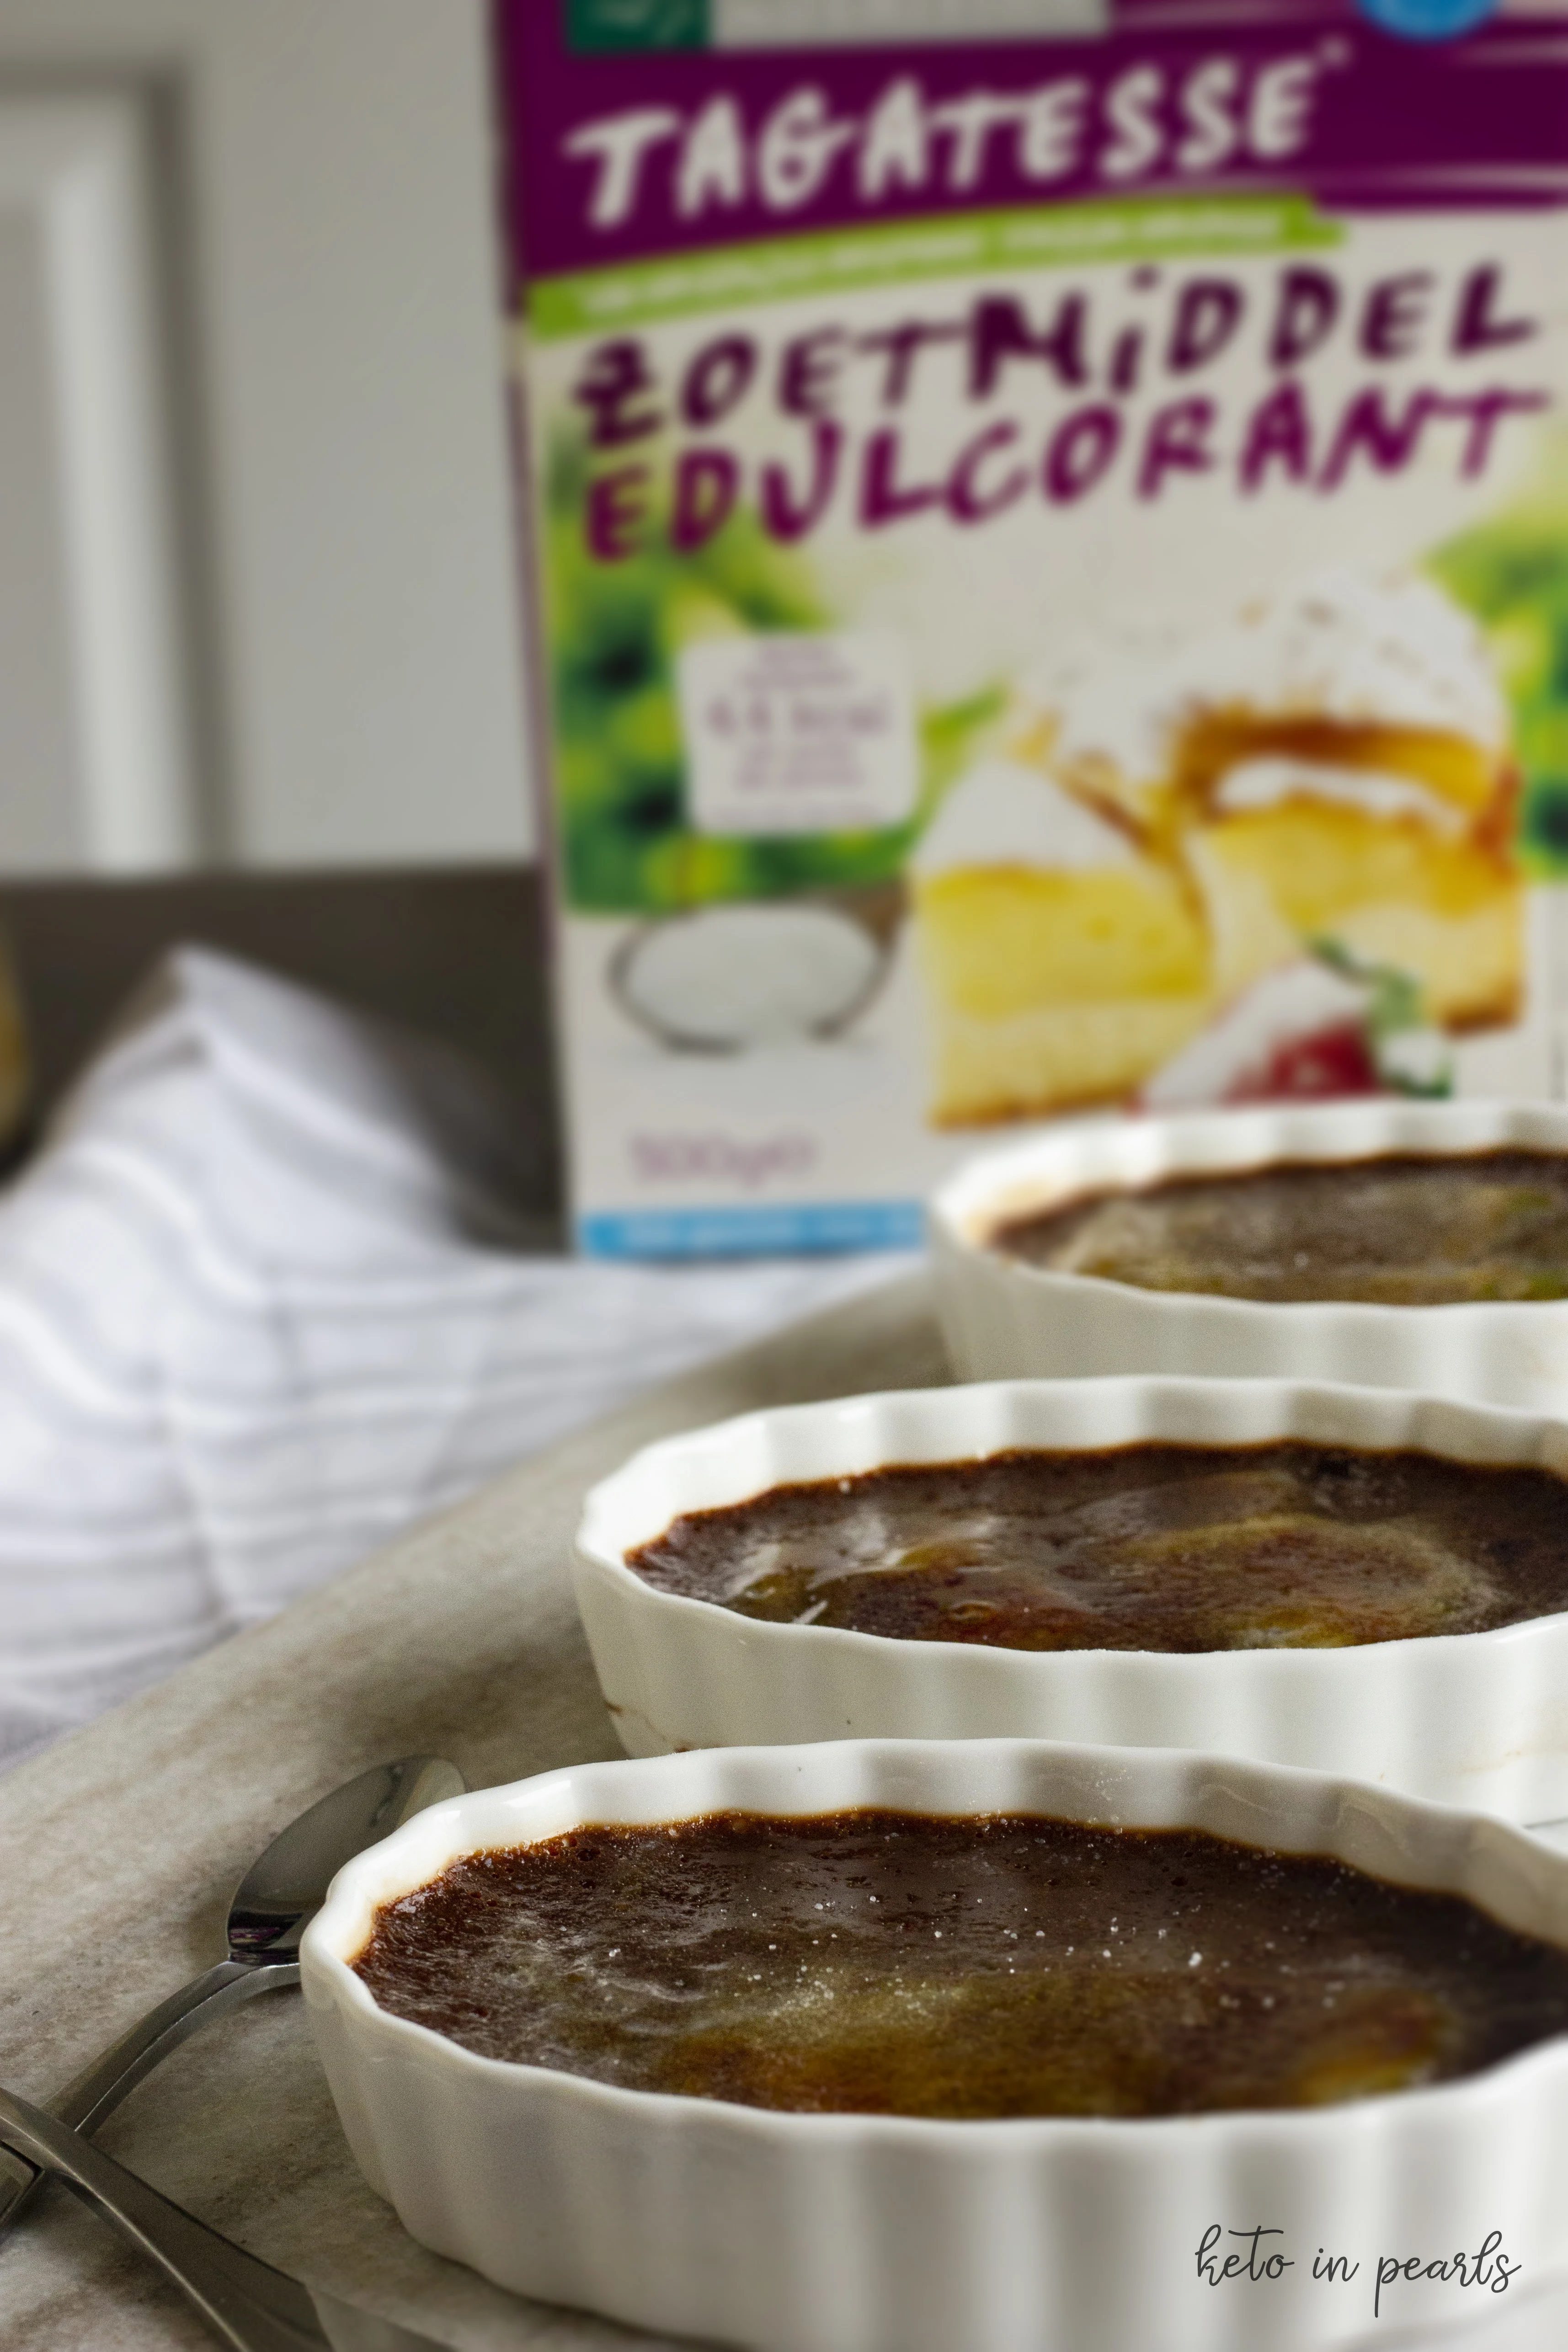 Keto chocolate pots de creme are a silky and decadent chocolate custard with a tagatose crystallized shell. Only 5 net carbs per serving and sugar free.